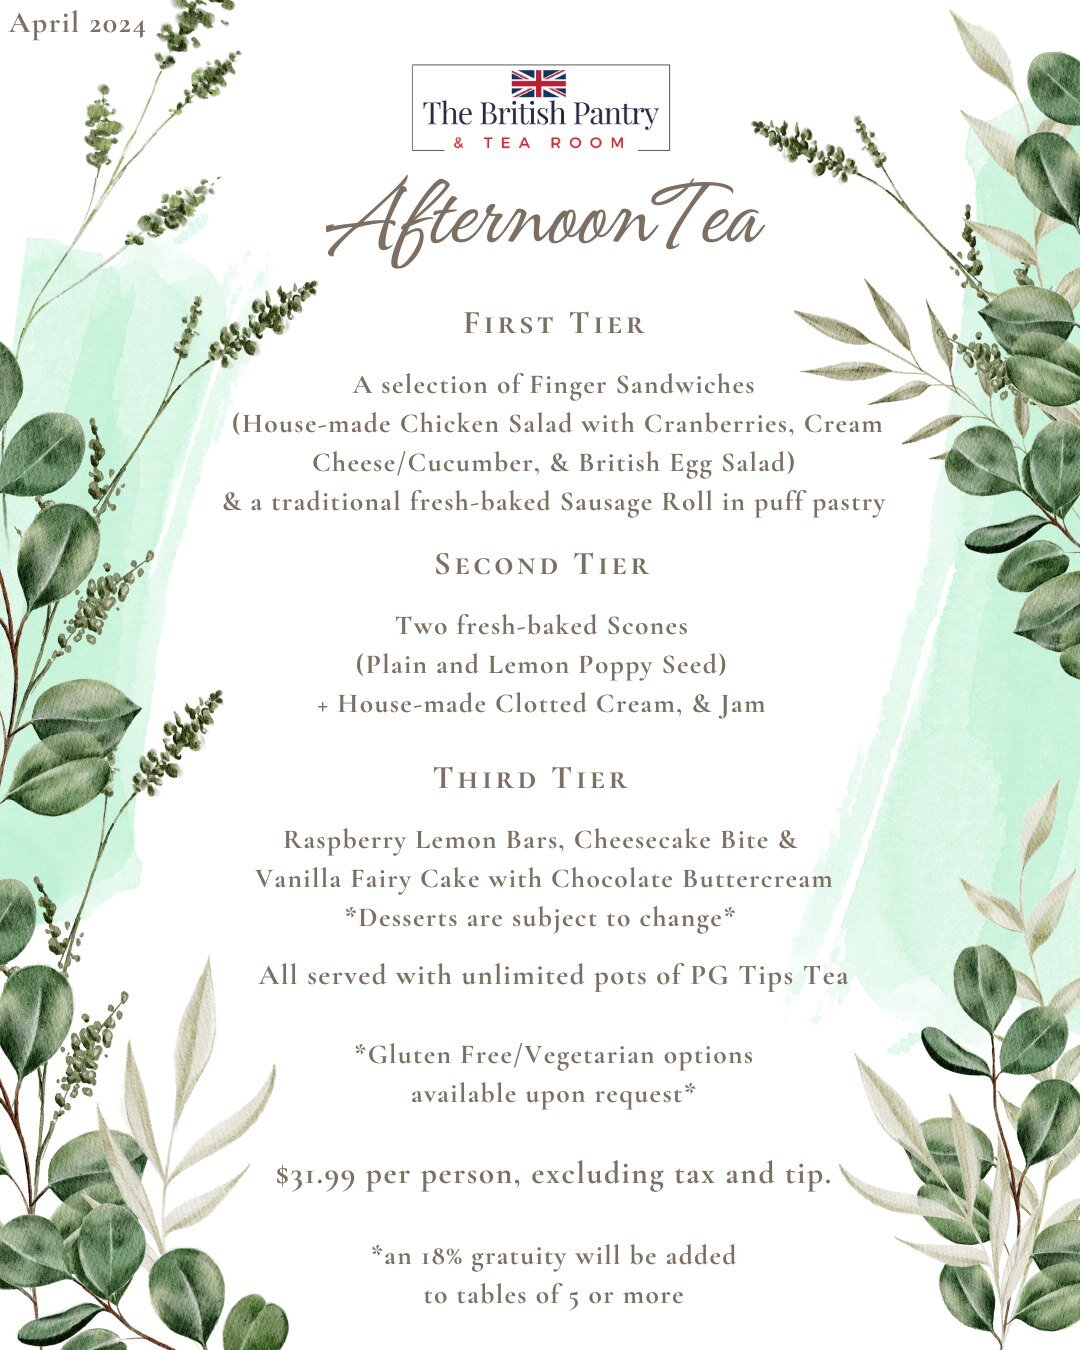 Exciting News! Join us at the British Pantry and Tea Room this April for a delightful afternoon tea experience every Saturday and Sunday from 11am-4pm! Indulge in our traditional afternoon tea featuring three tiers of British deliciousness - Finger S